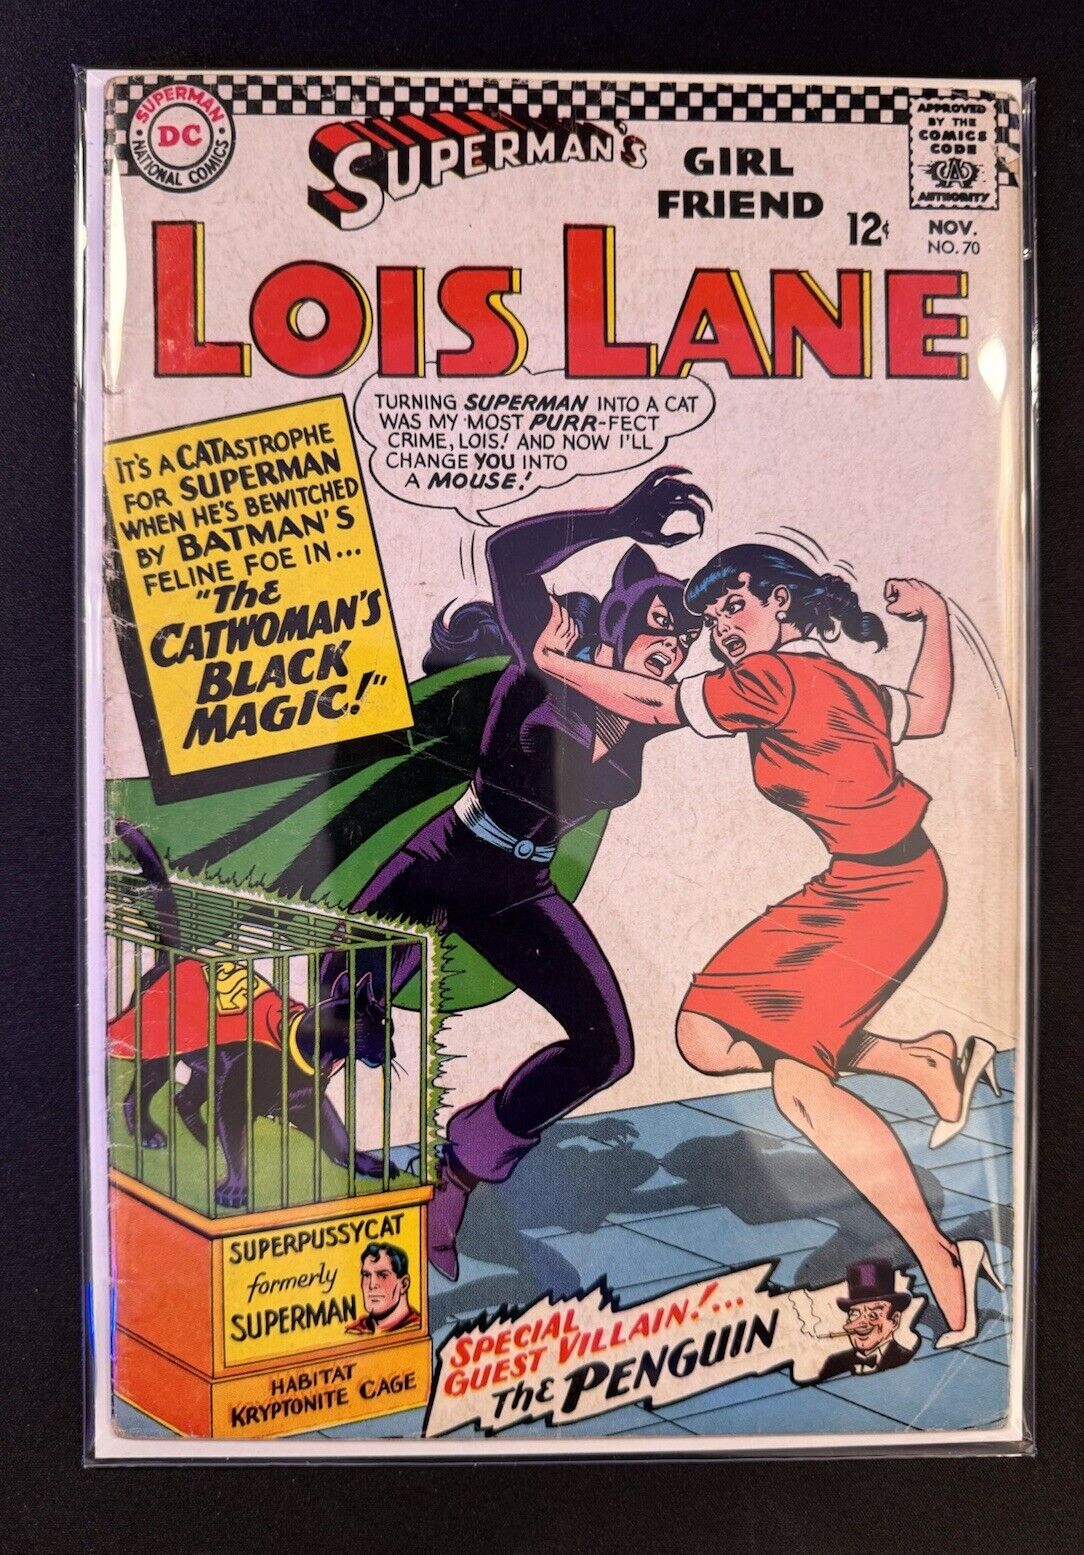 💥 SUPERMAN ‘S GF LOIS LANE #70 1st APPEARANCE CATWOMAN IN SILVER AGE